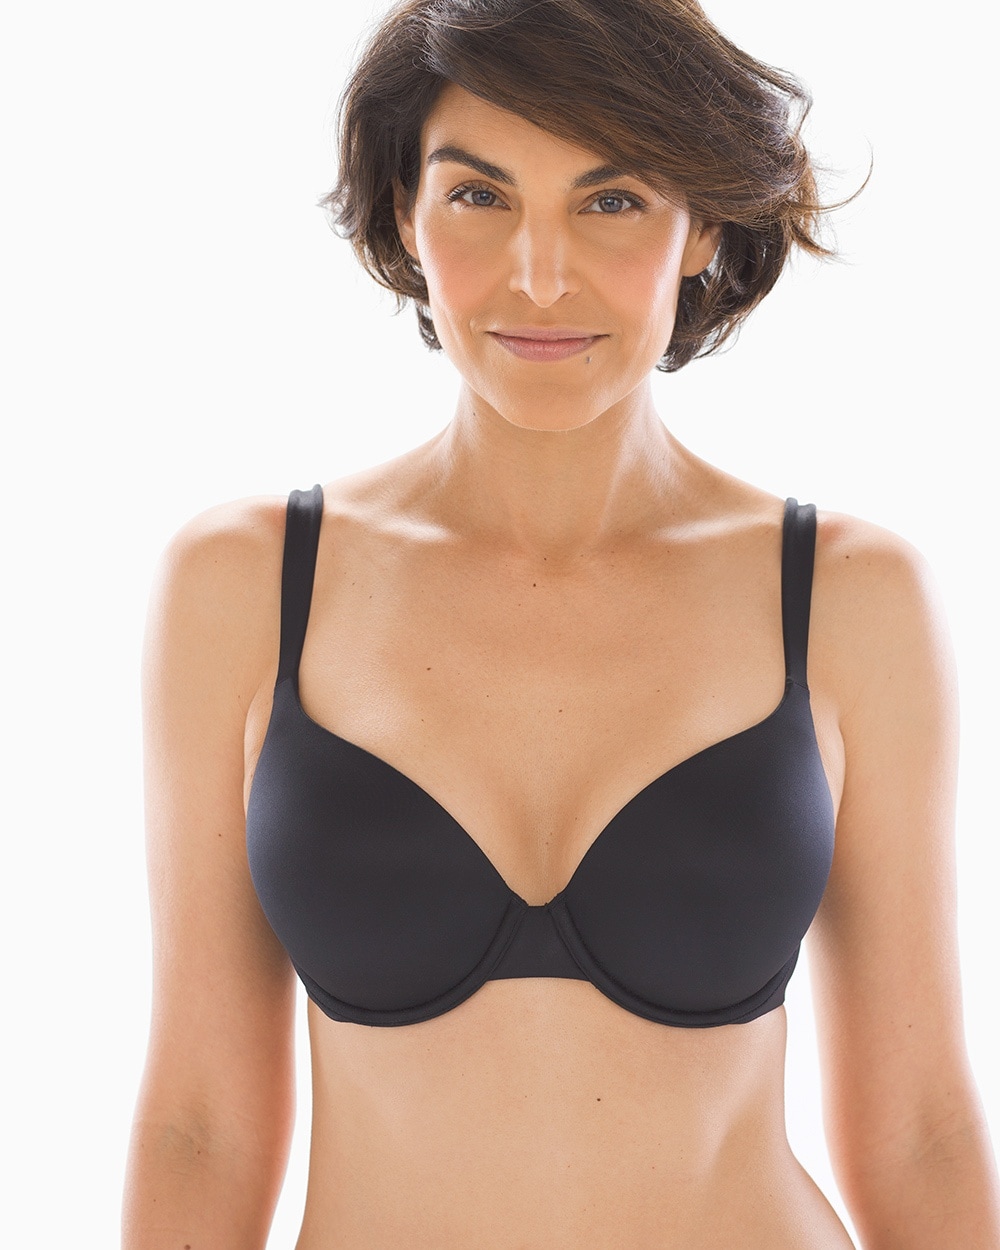 Soma's New Smart Bra Will Help You Find the Perfect Fit